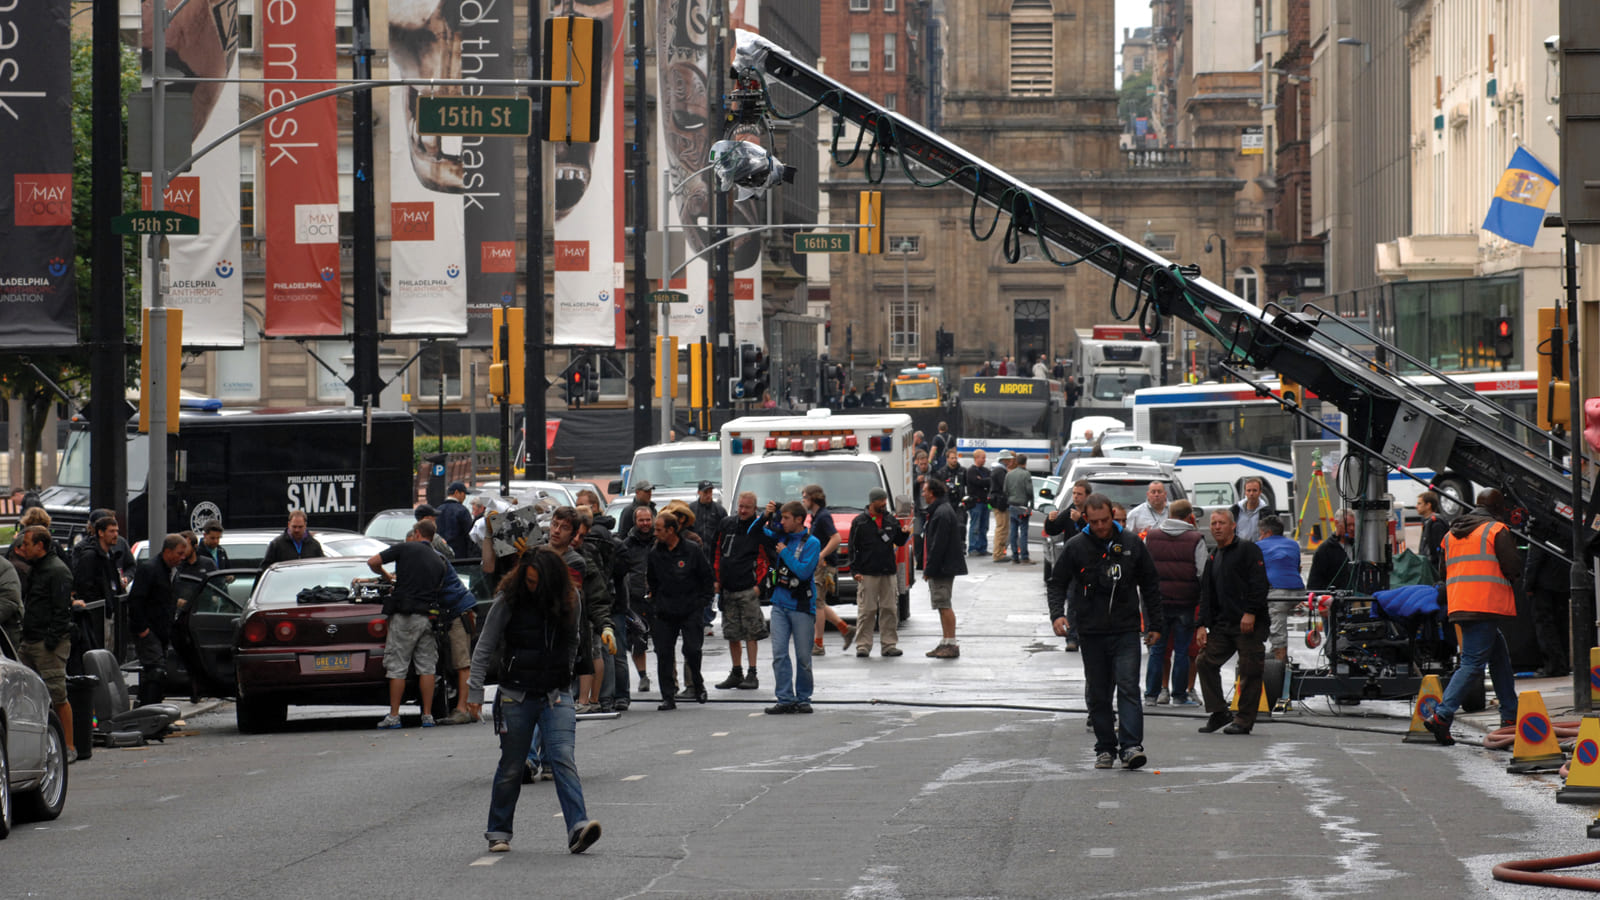 WWZ filming in Glasgow, a scene depicting traffic chaos with a SWAT team in the distance